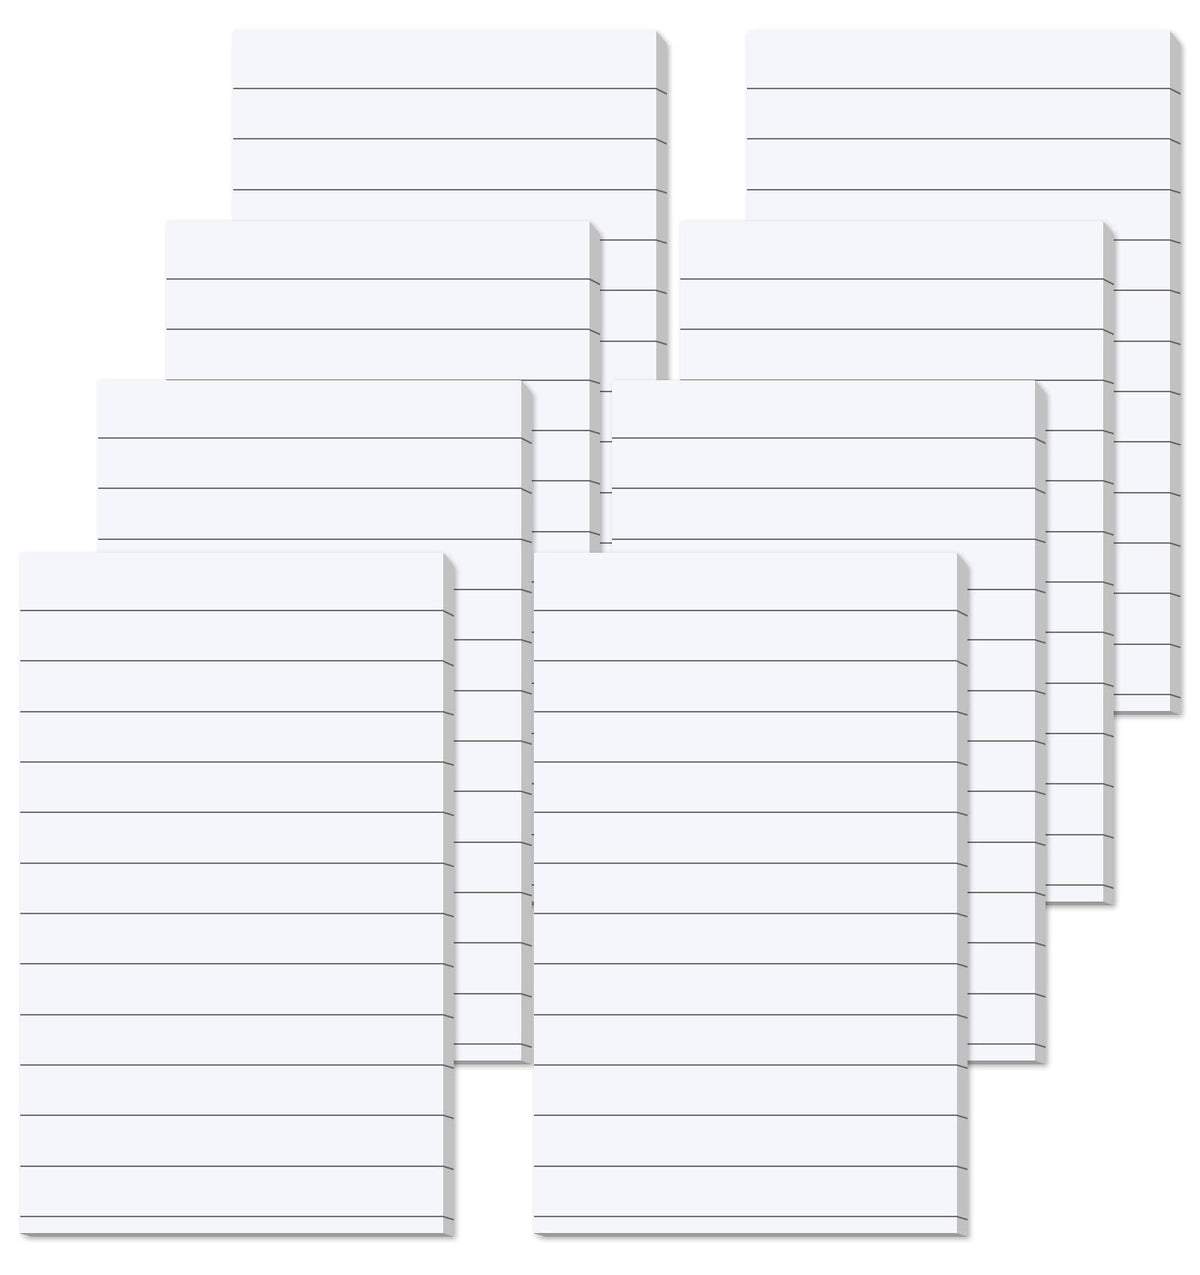 Agoer 400 Lined Sticky Notes,Large Sticky Notes 76 x 127mm,8 Pack Sticky Notes White Self-Adhesive Notes,Pastel Ruled Post Stickies for Marking Pages for for Reminder,School,Meeting Check-400 Sheet